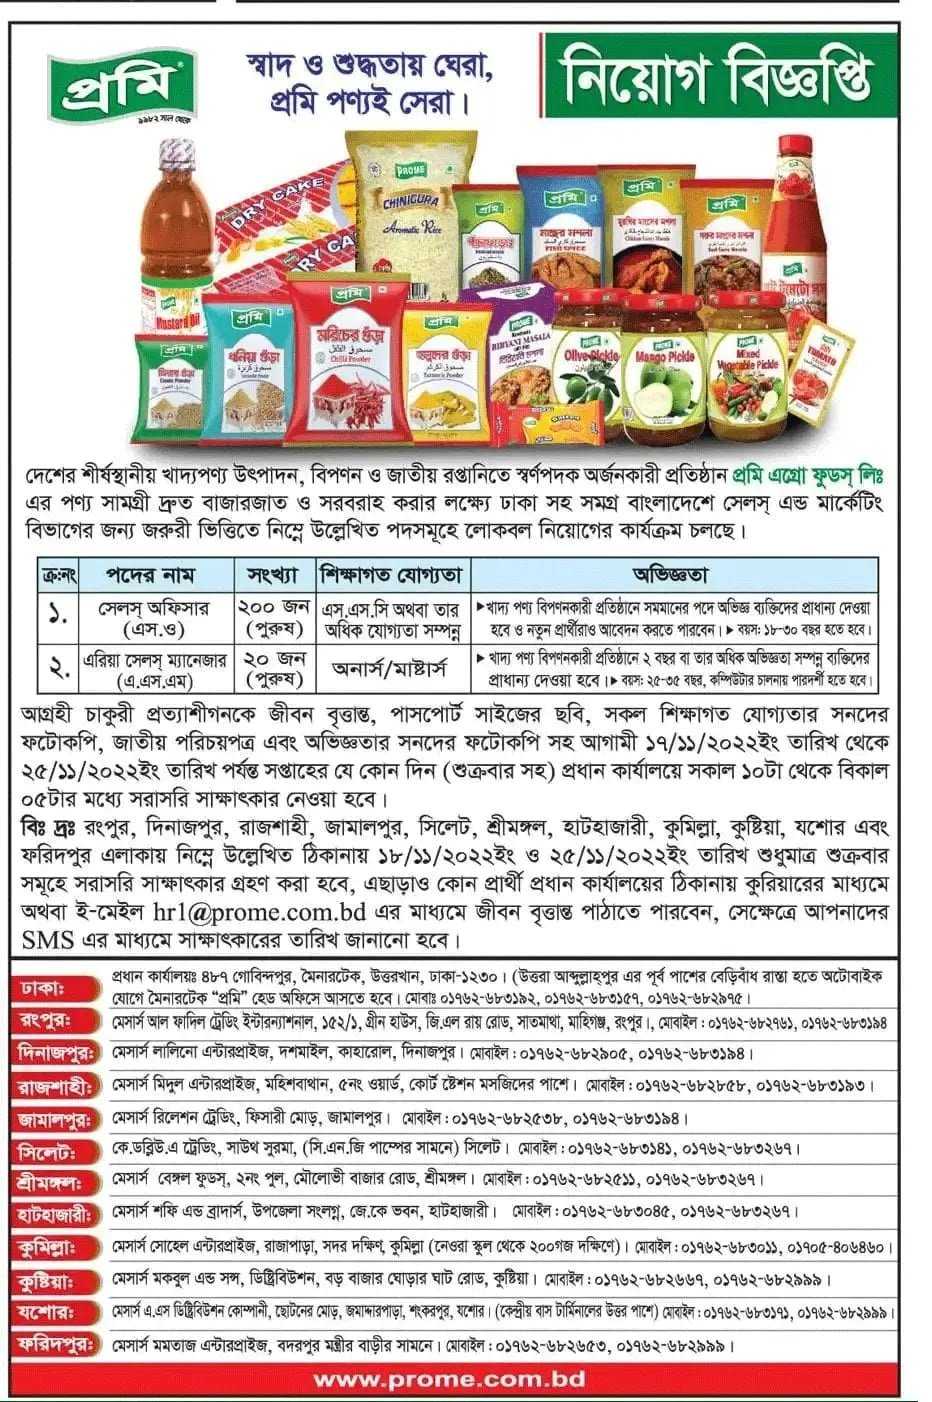 prome agro foods limited job circular 2022 prome agro foods ltd job circular 2021 prome agro foods job circular 2021 prome agro foods ltd job circular prome agro food job circular